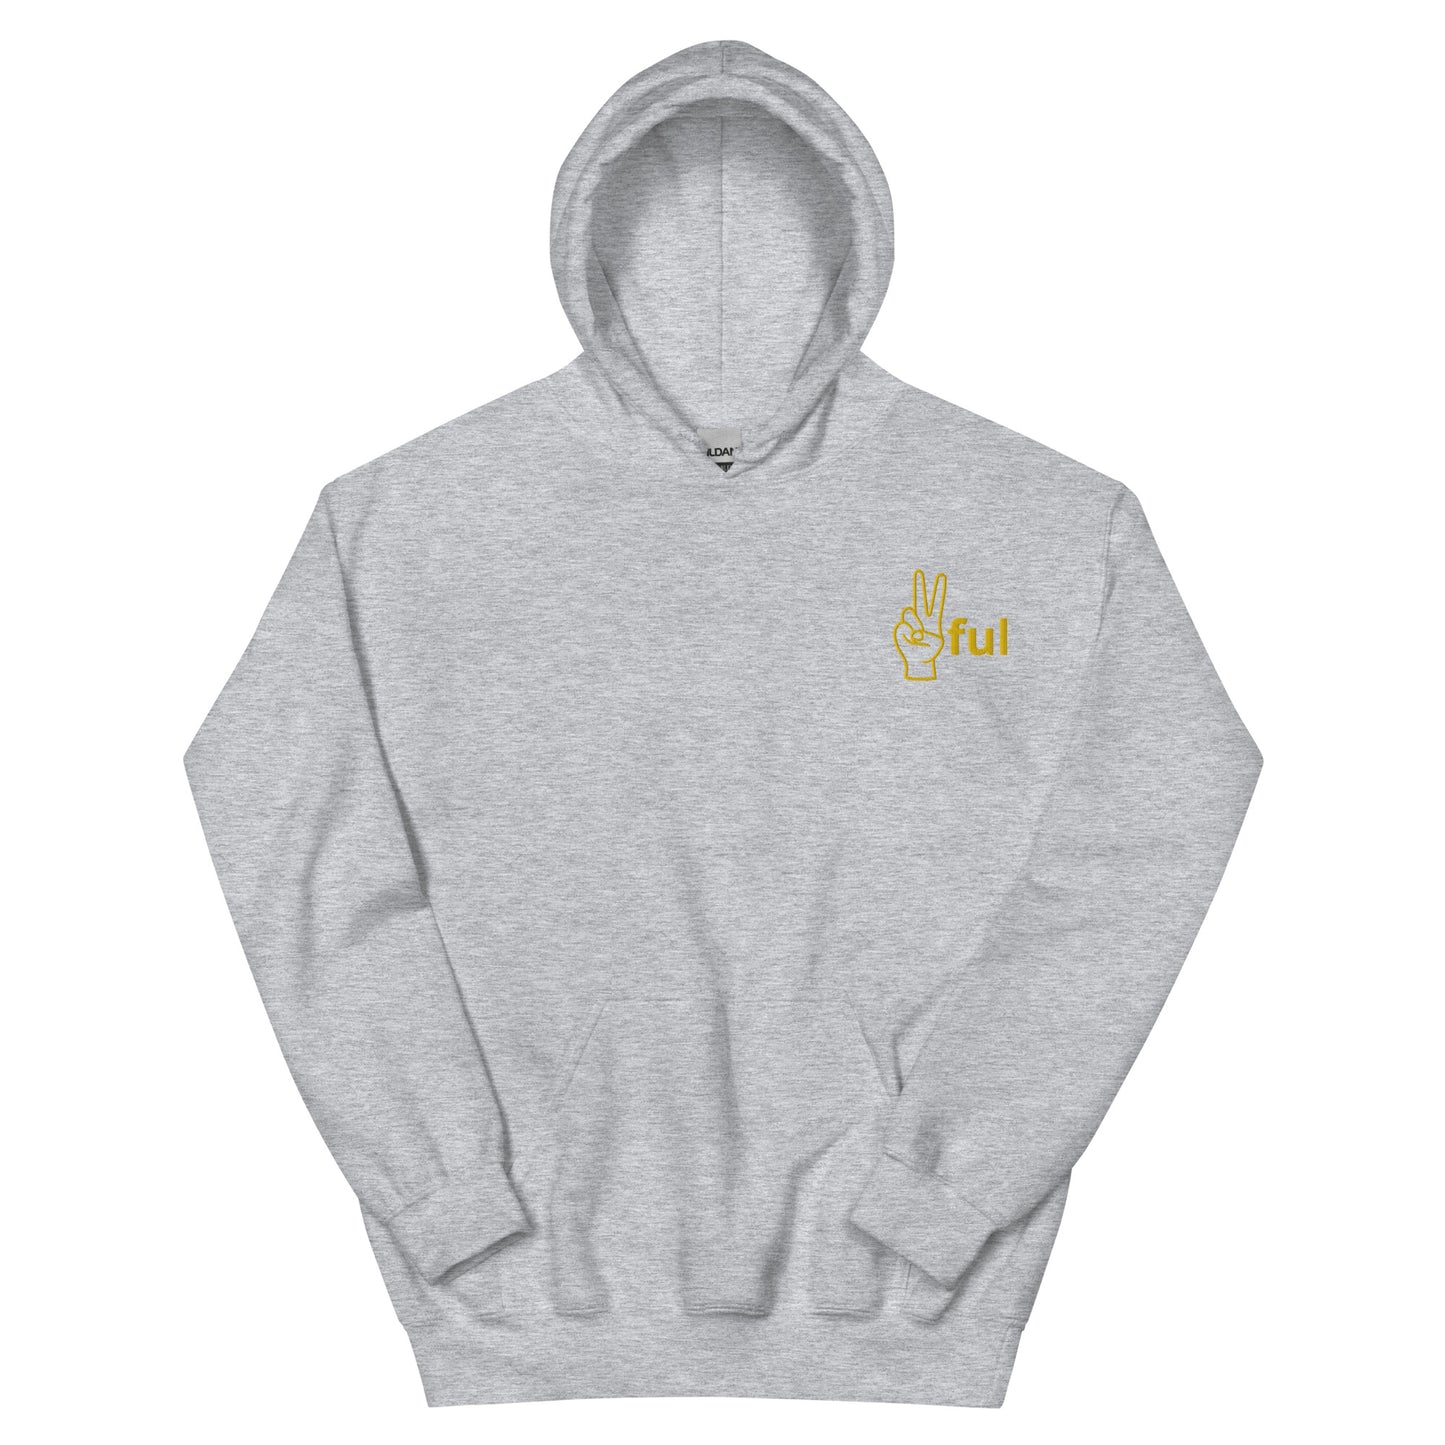 Unisex Gold Lettered ✌️ful Hoodie S-5XL